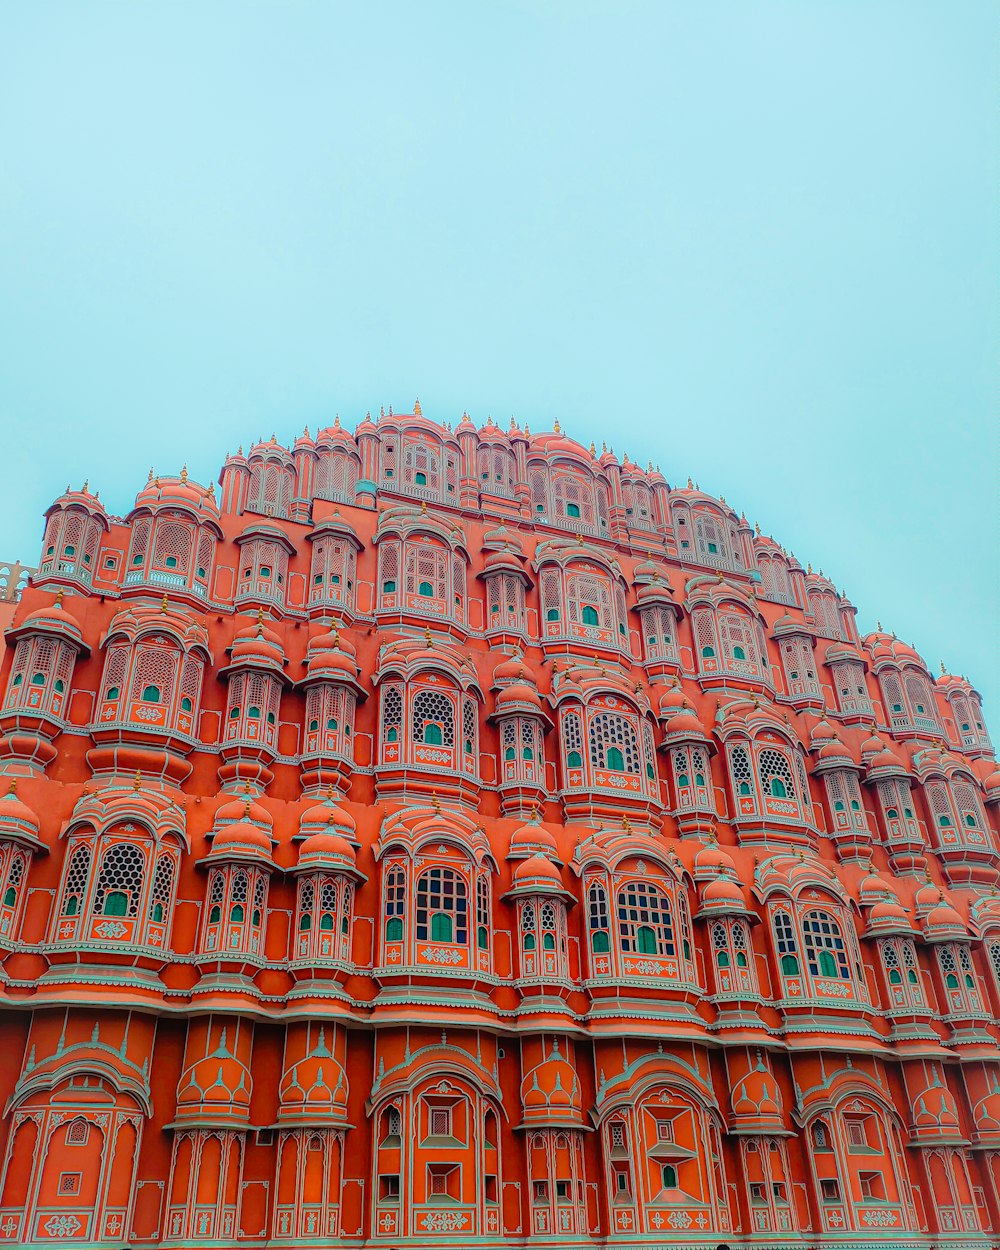 a large building with many windows with Hawa Mahal in the background